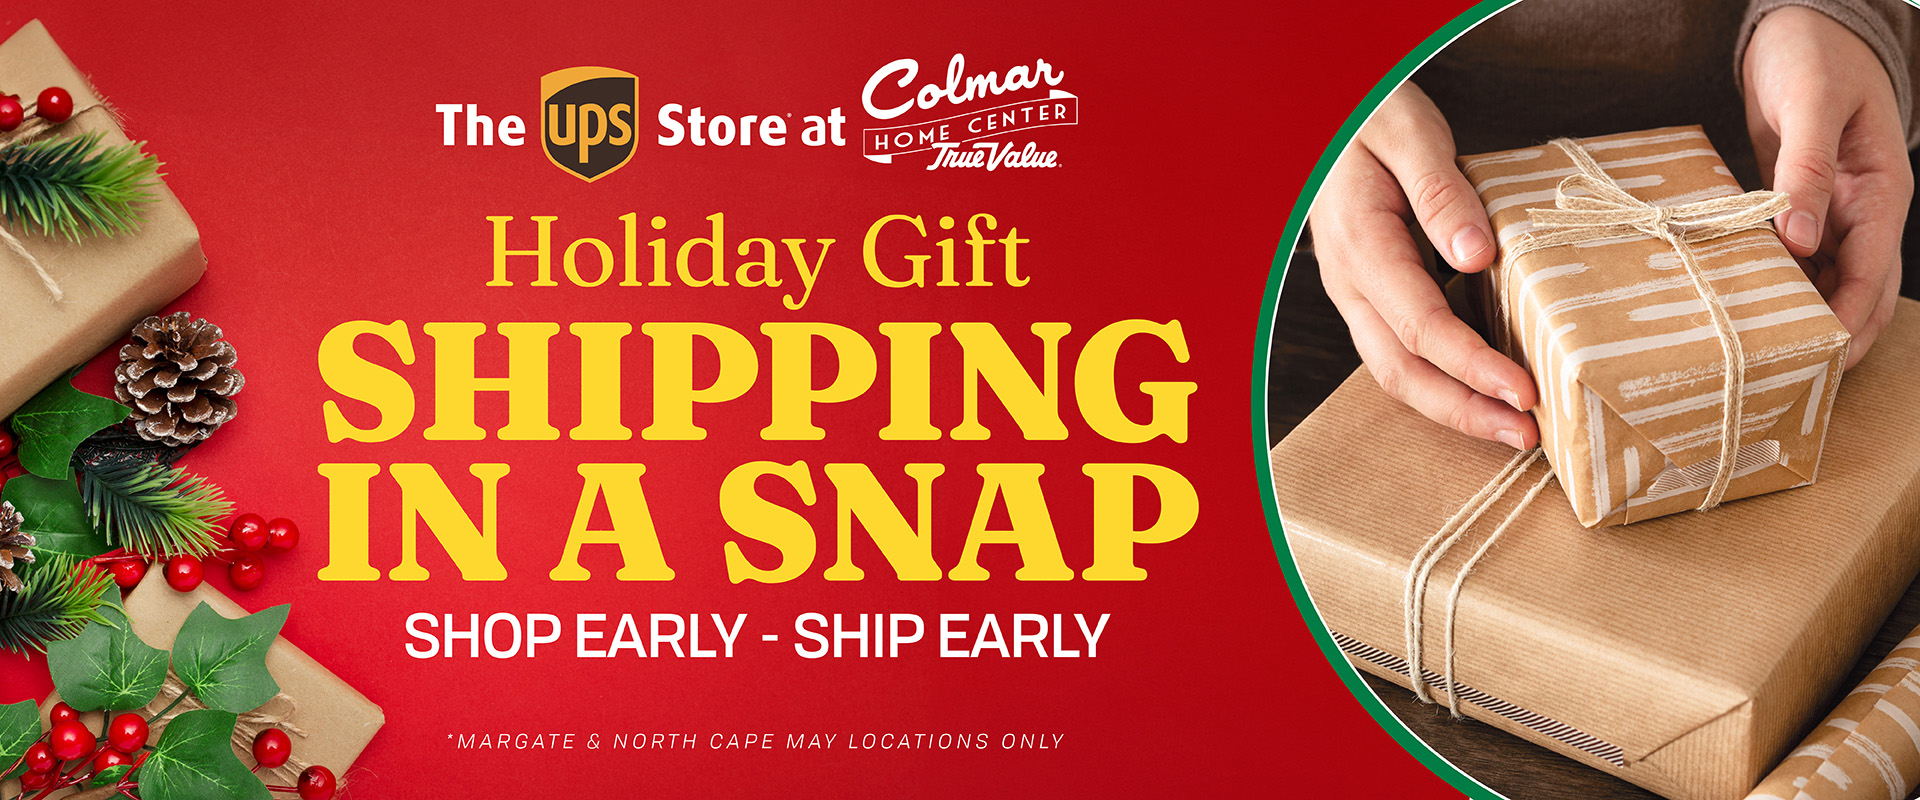 CHC - UPS Holiday Gift Shipping in a Snap